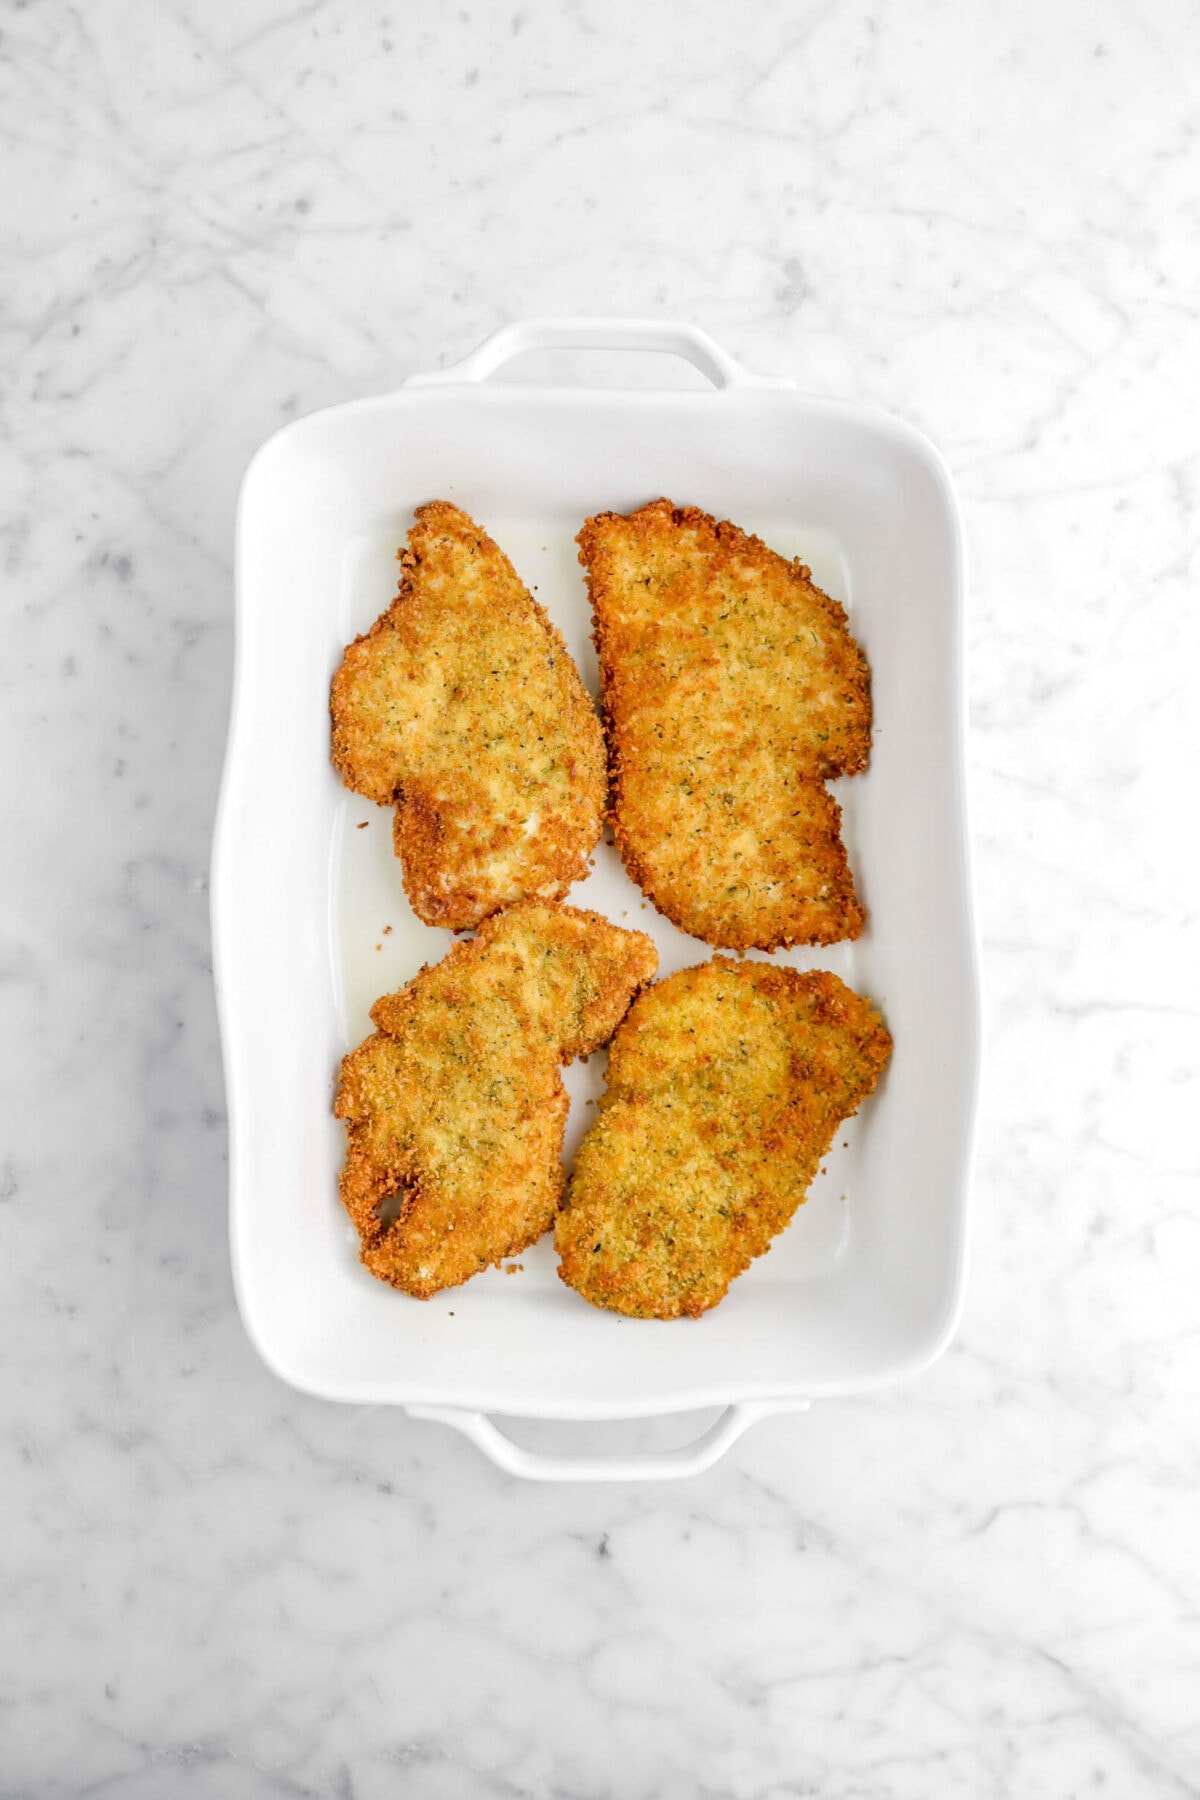 four fried chicken breasts in large white casserole